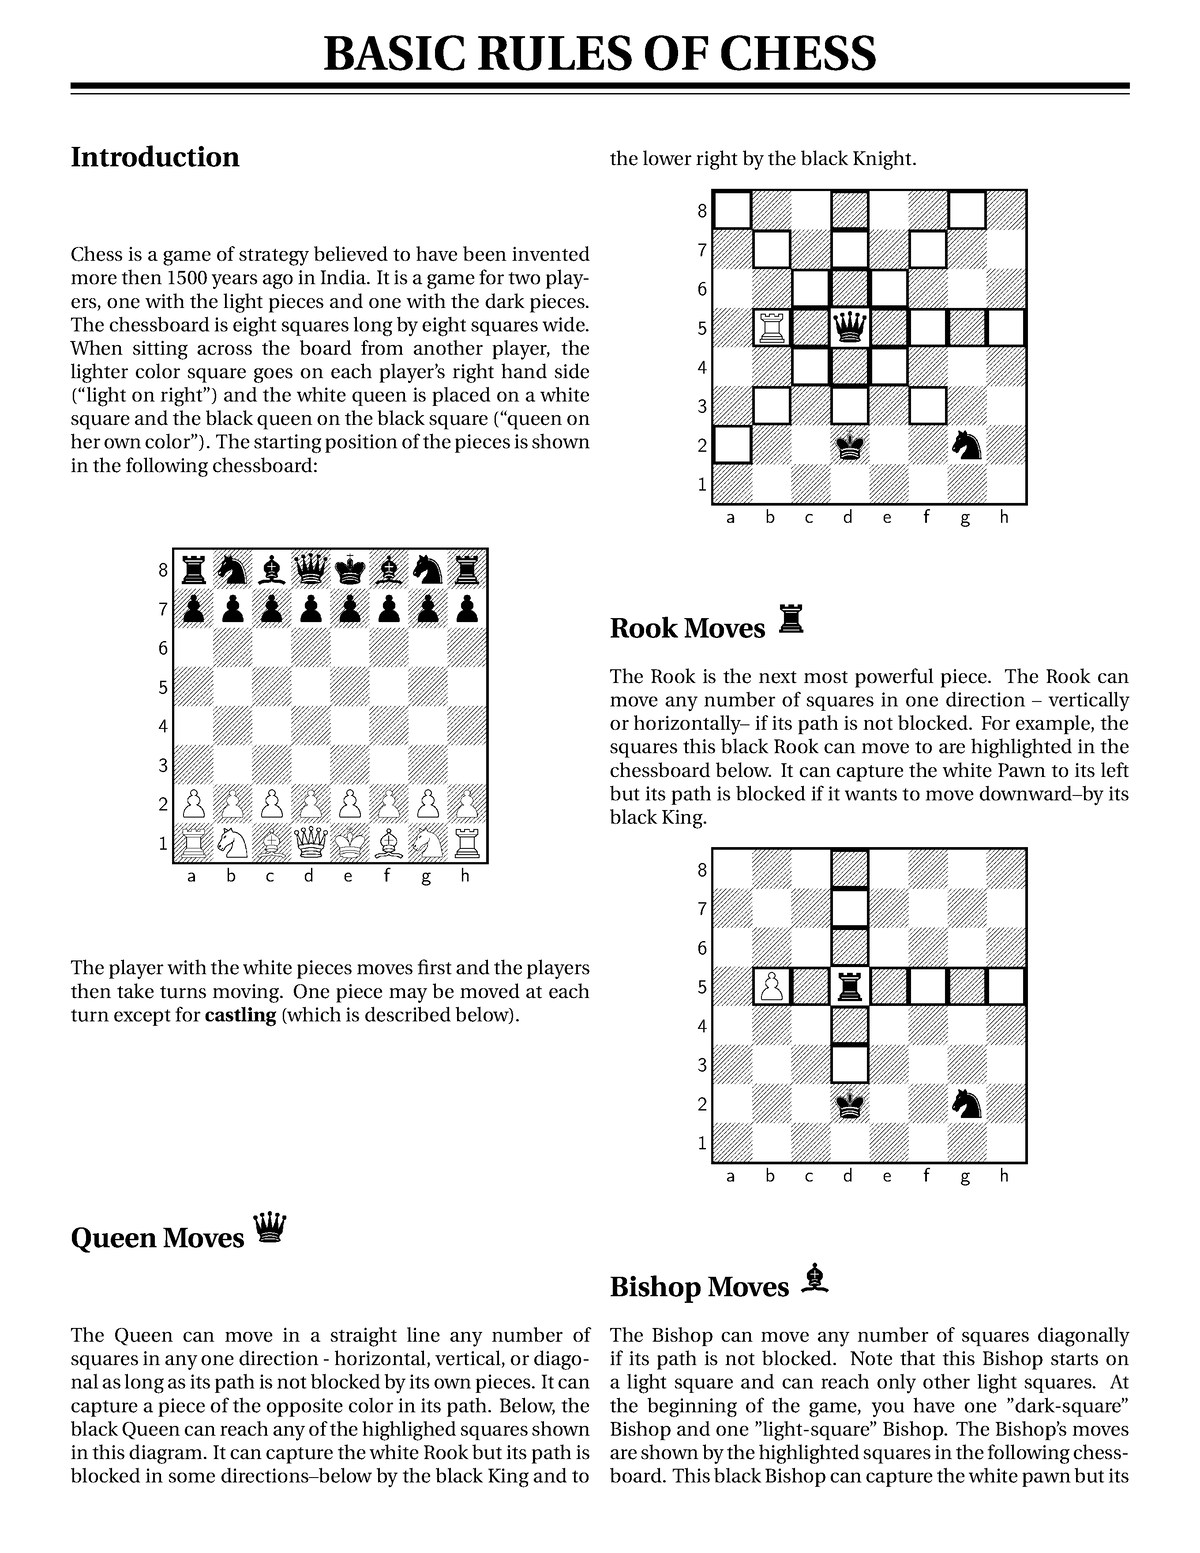 If the 16 personality types were forced into being chess pieces on a  chessboard, which would make up the 16 different pieces per side (8 pawns,  2 royals, knights, bishops, rooks)? - Quora